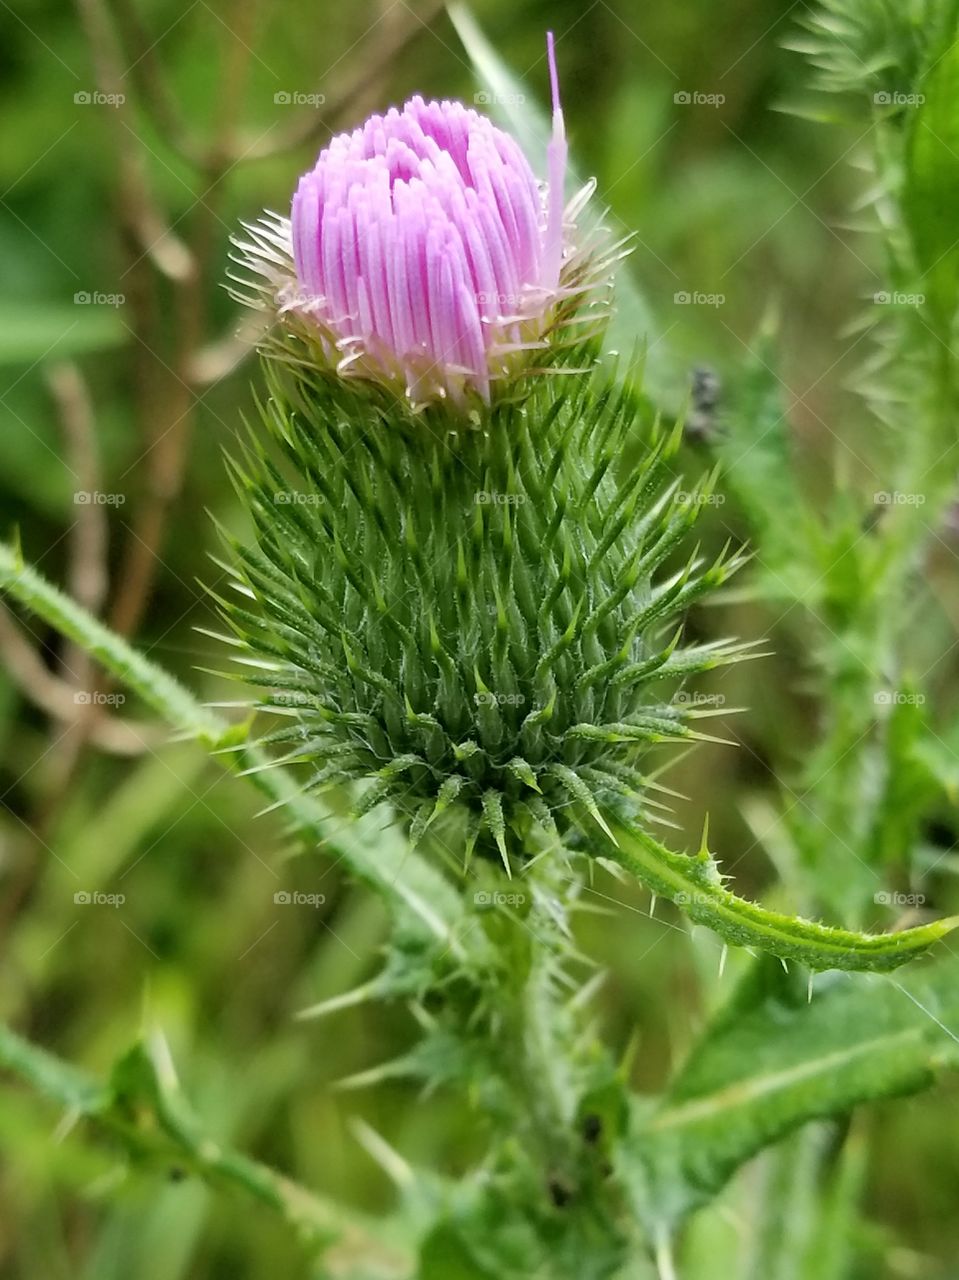 I am called a milk thistle with a prickly green spine an a dark pink center at the top.Iam a lovely wild flower